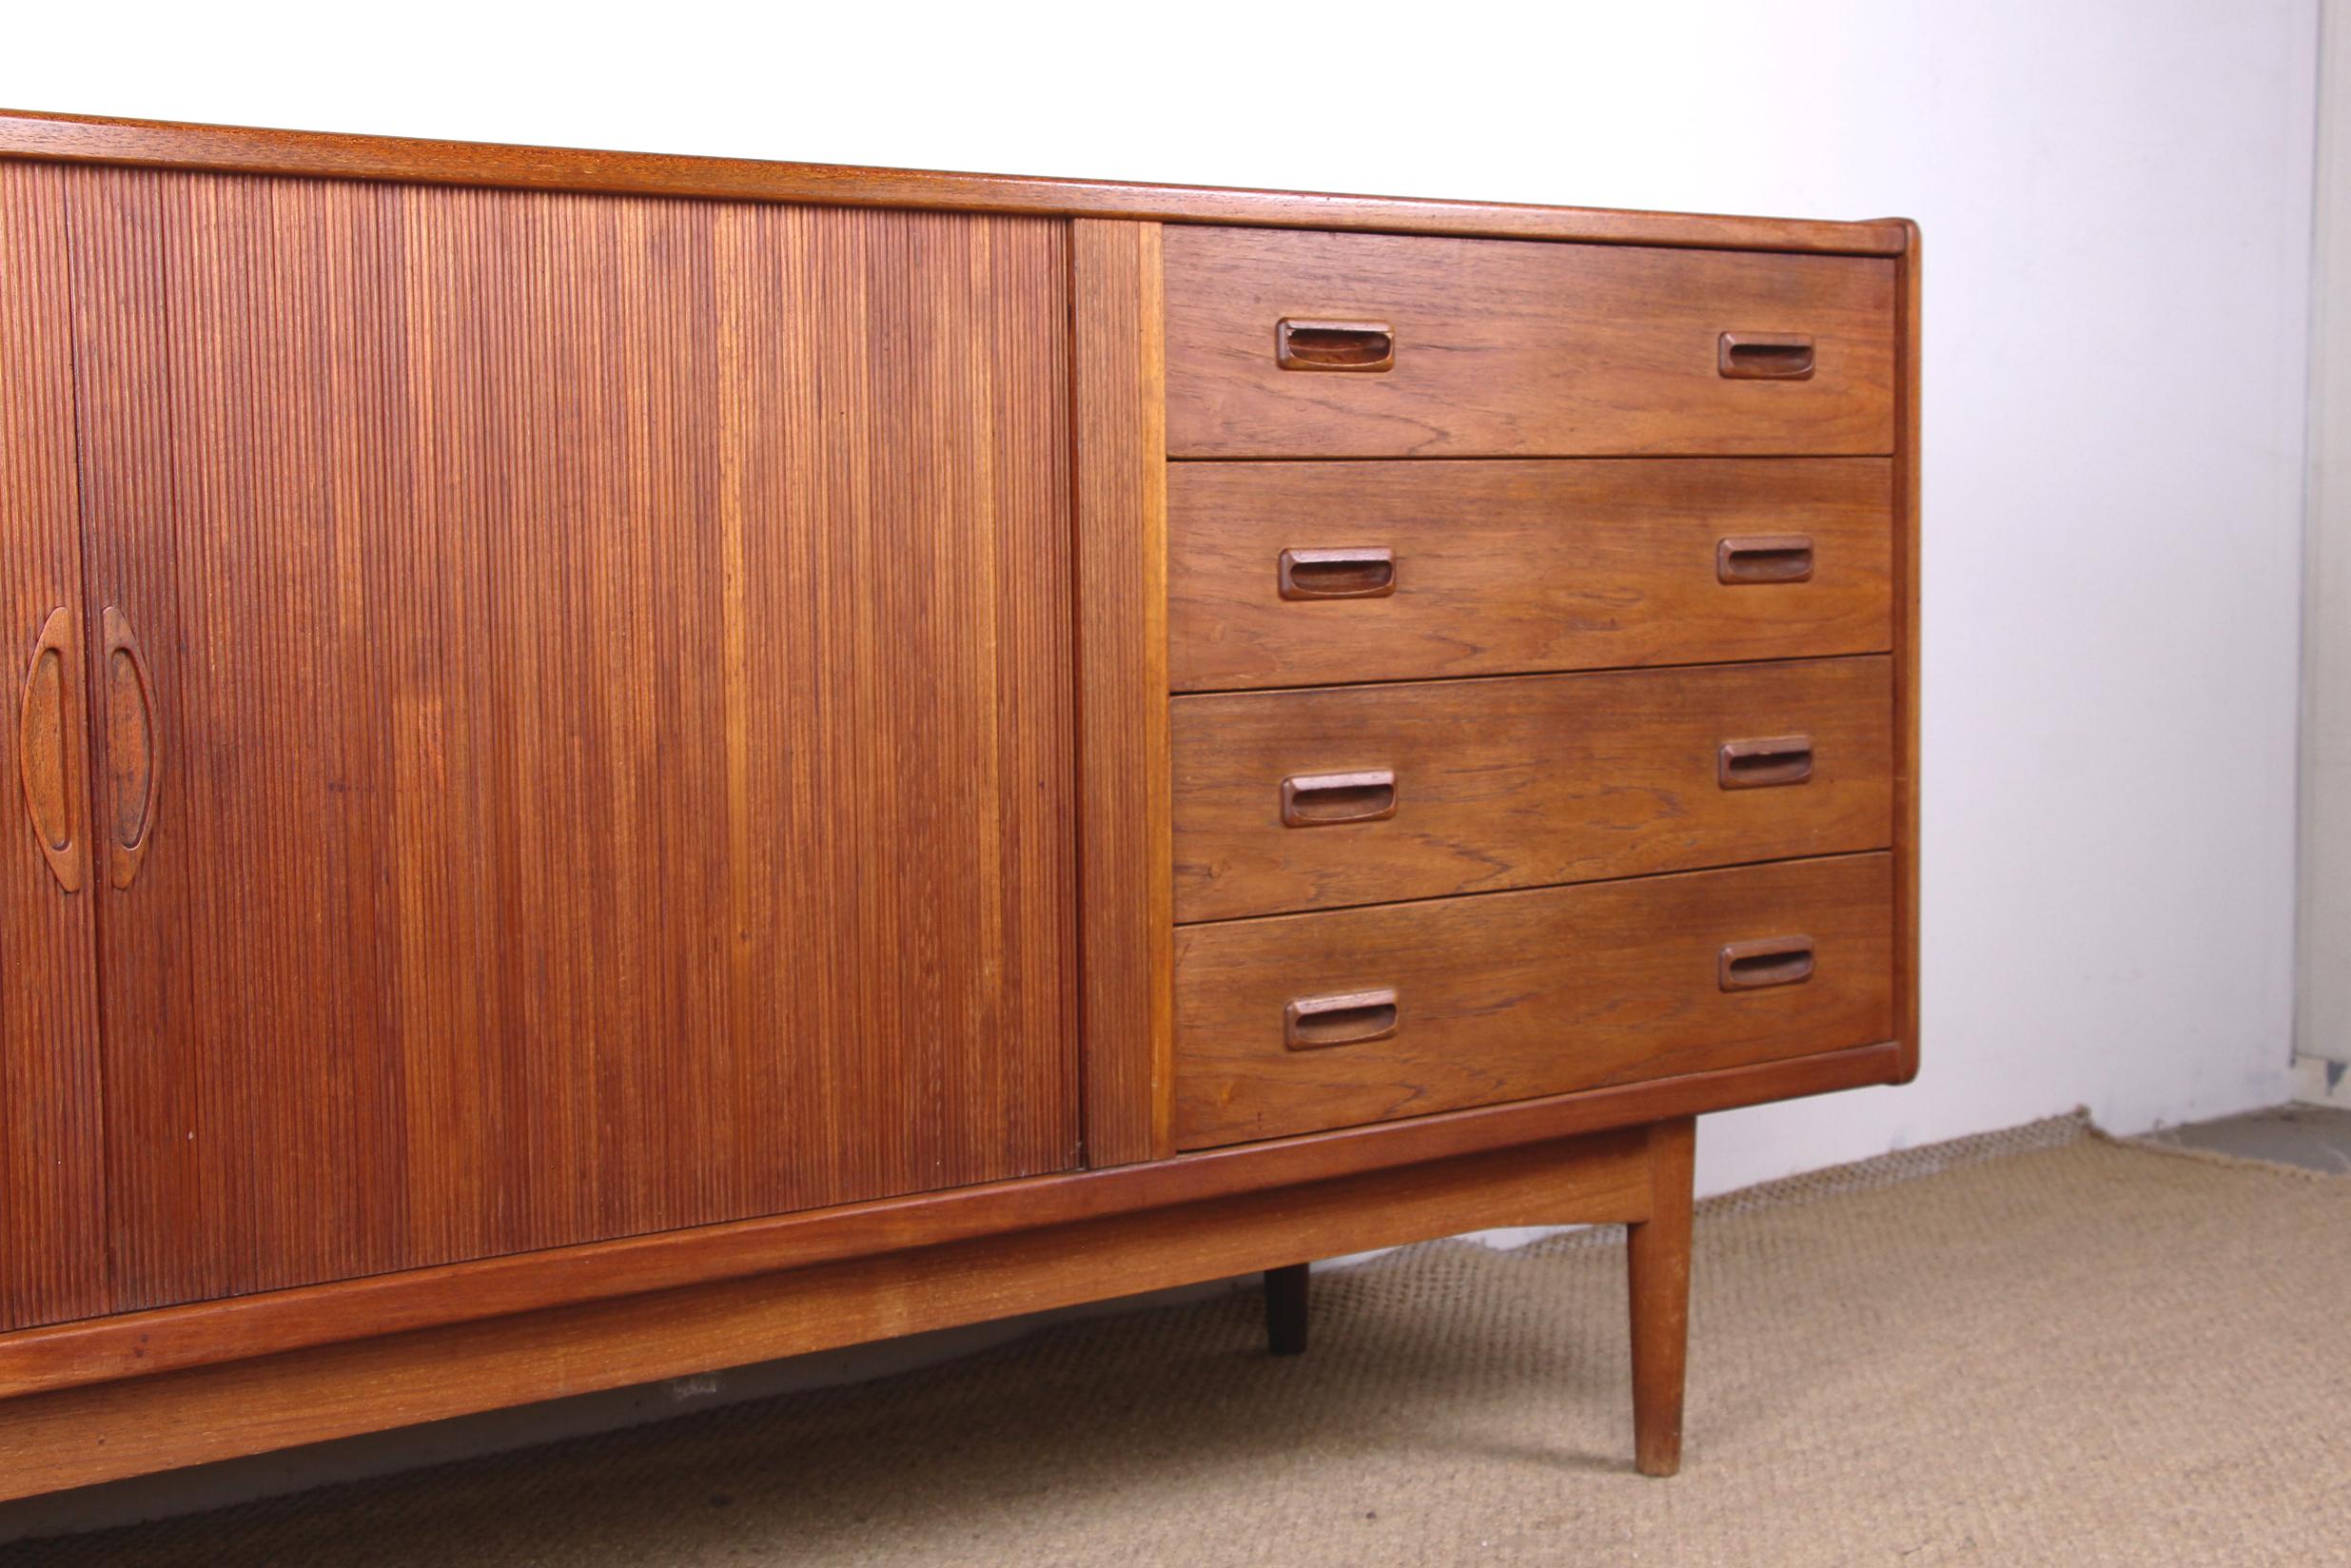 Superb little Scandinavian Sideboard. 4 Large drawers on the right side. 2 